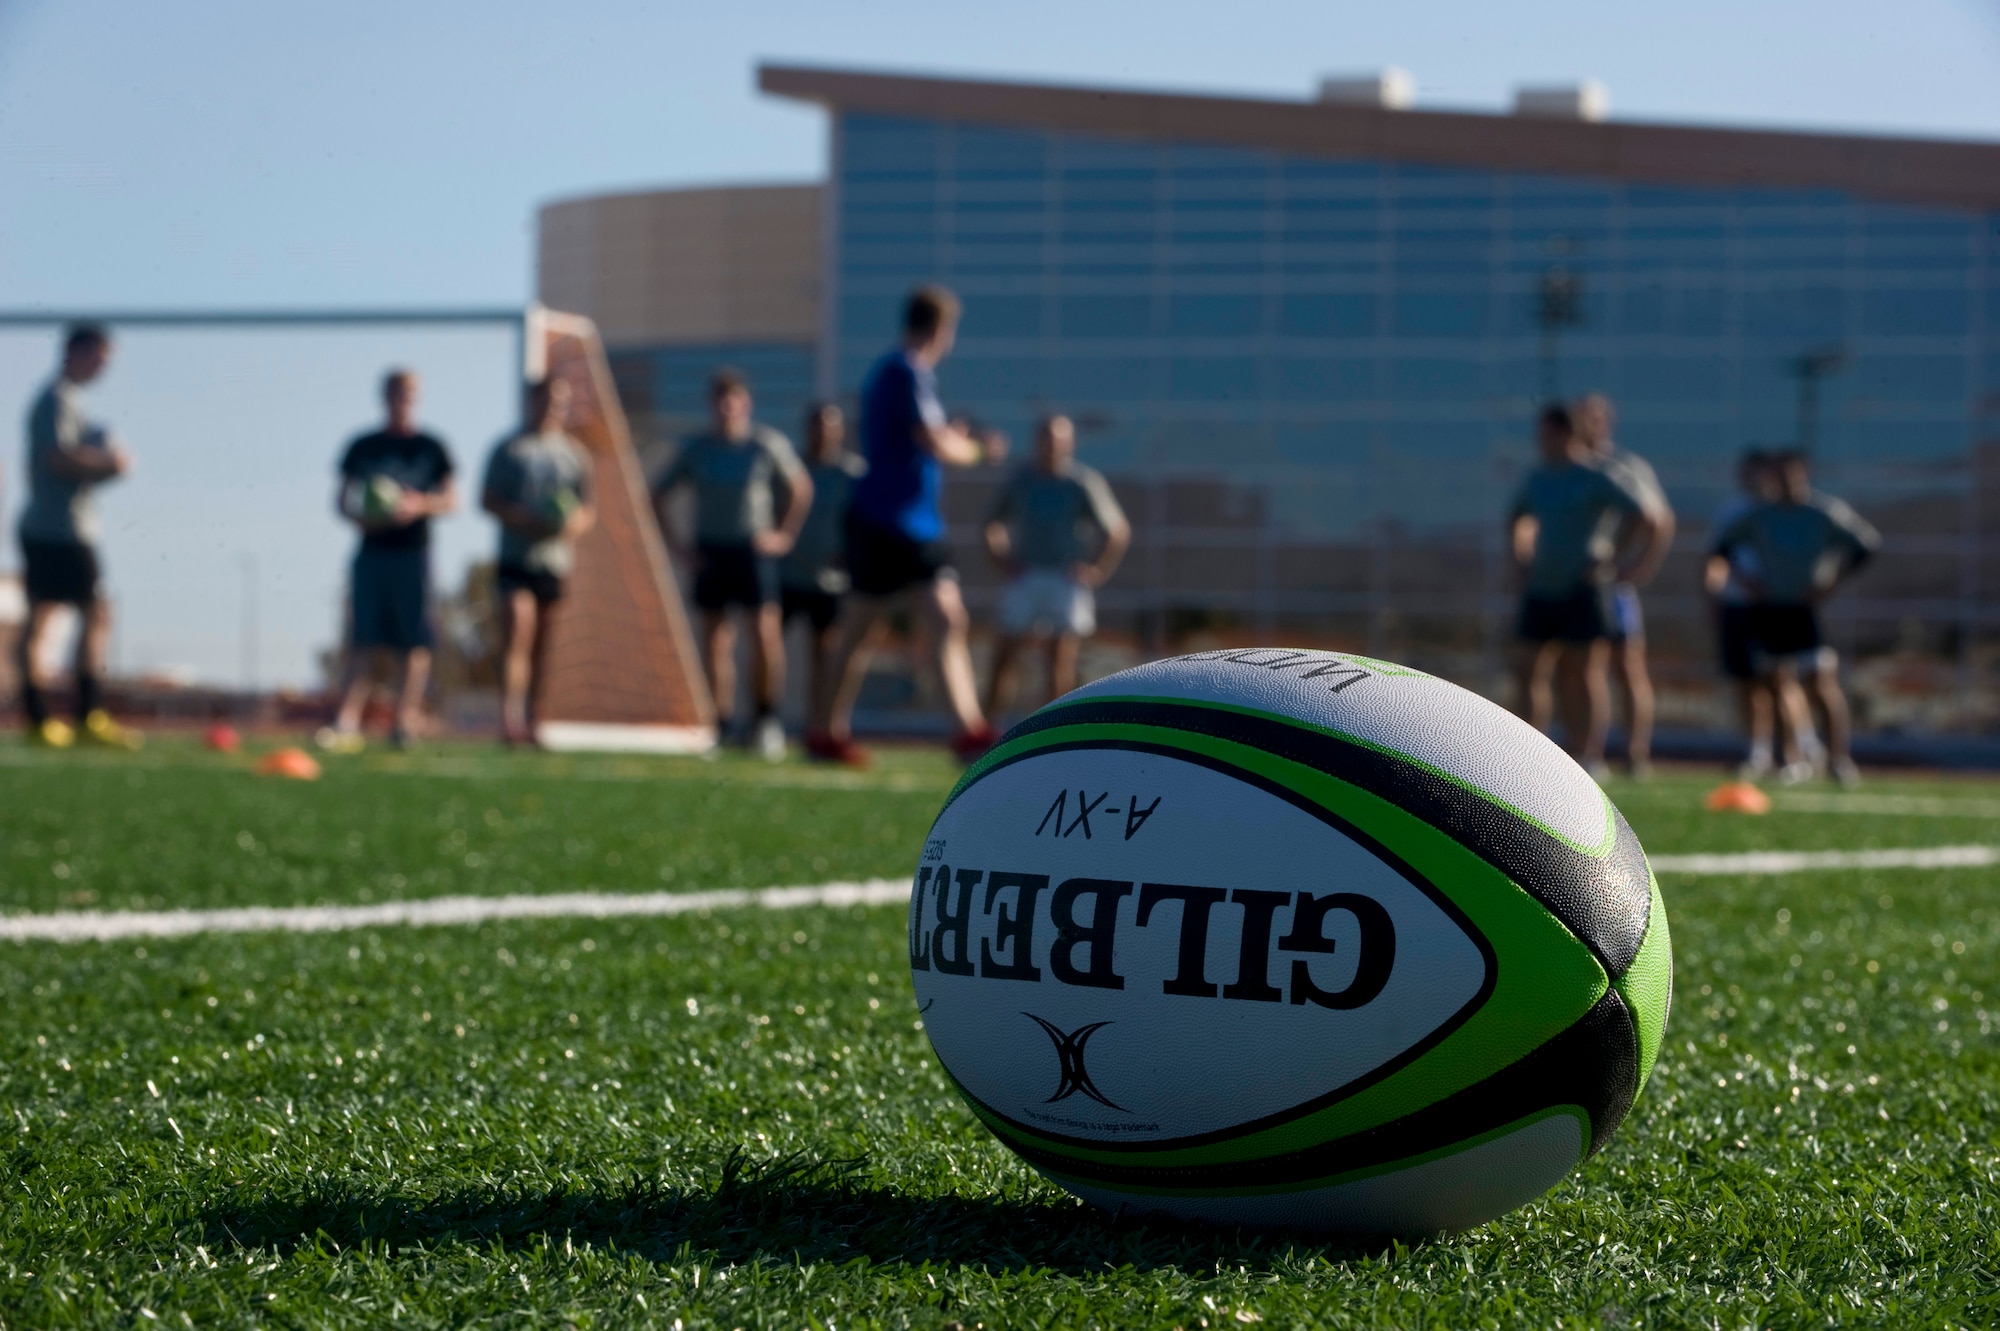 Members from U.S. military rugby teams practice drills during the military rugby clinic Feb. 6, 2013, at Nellis Air Force Base, Nev. Teams attending the clinic are preparing to play in the 2013 USA Sevens Rugby Tournament being held in Las Vegas Feb. 8-10, 2013. (U.S. Air Force photo by Senior Airman Matthew Lancaster)